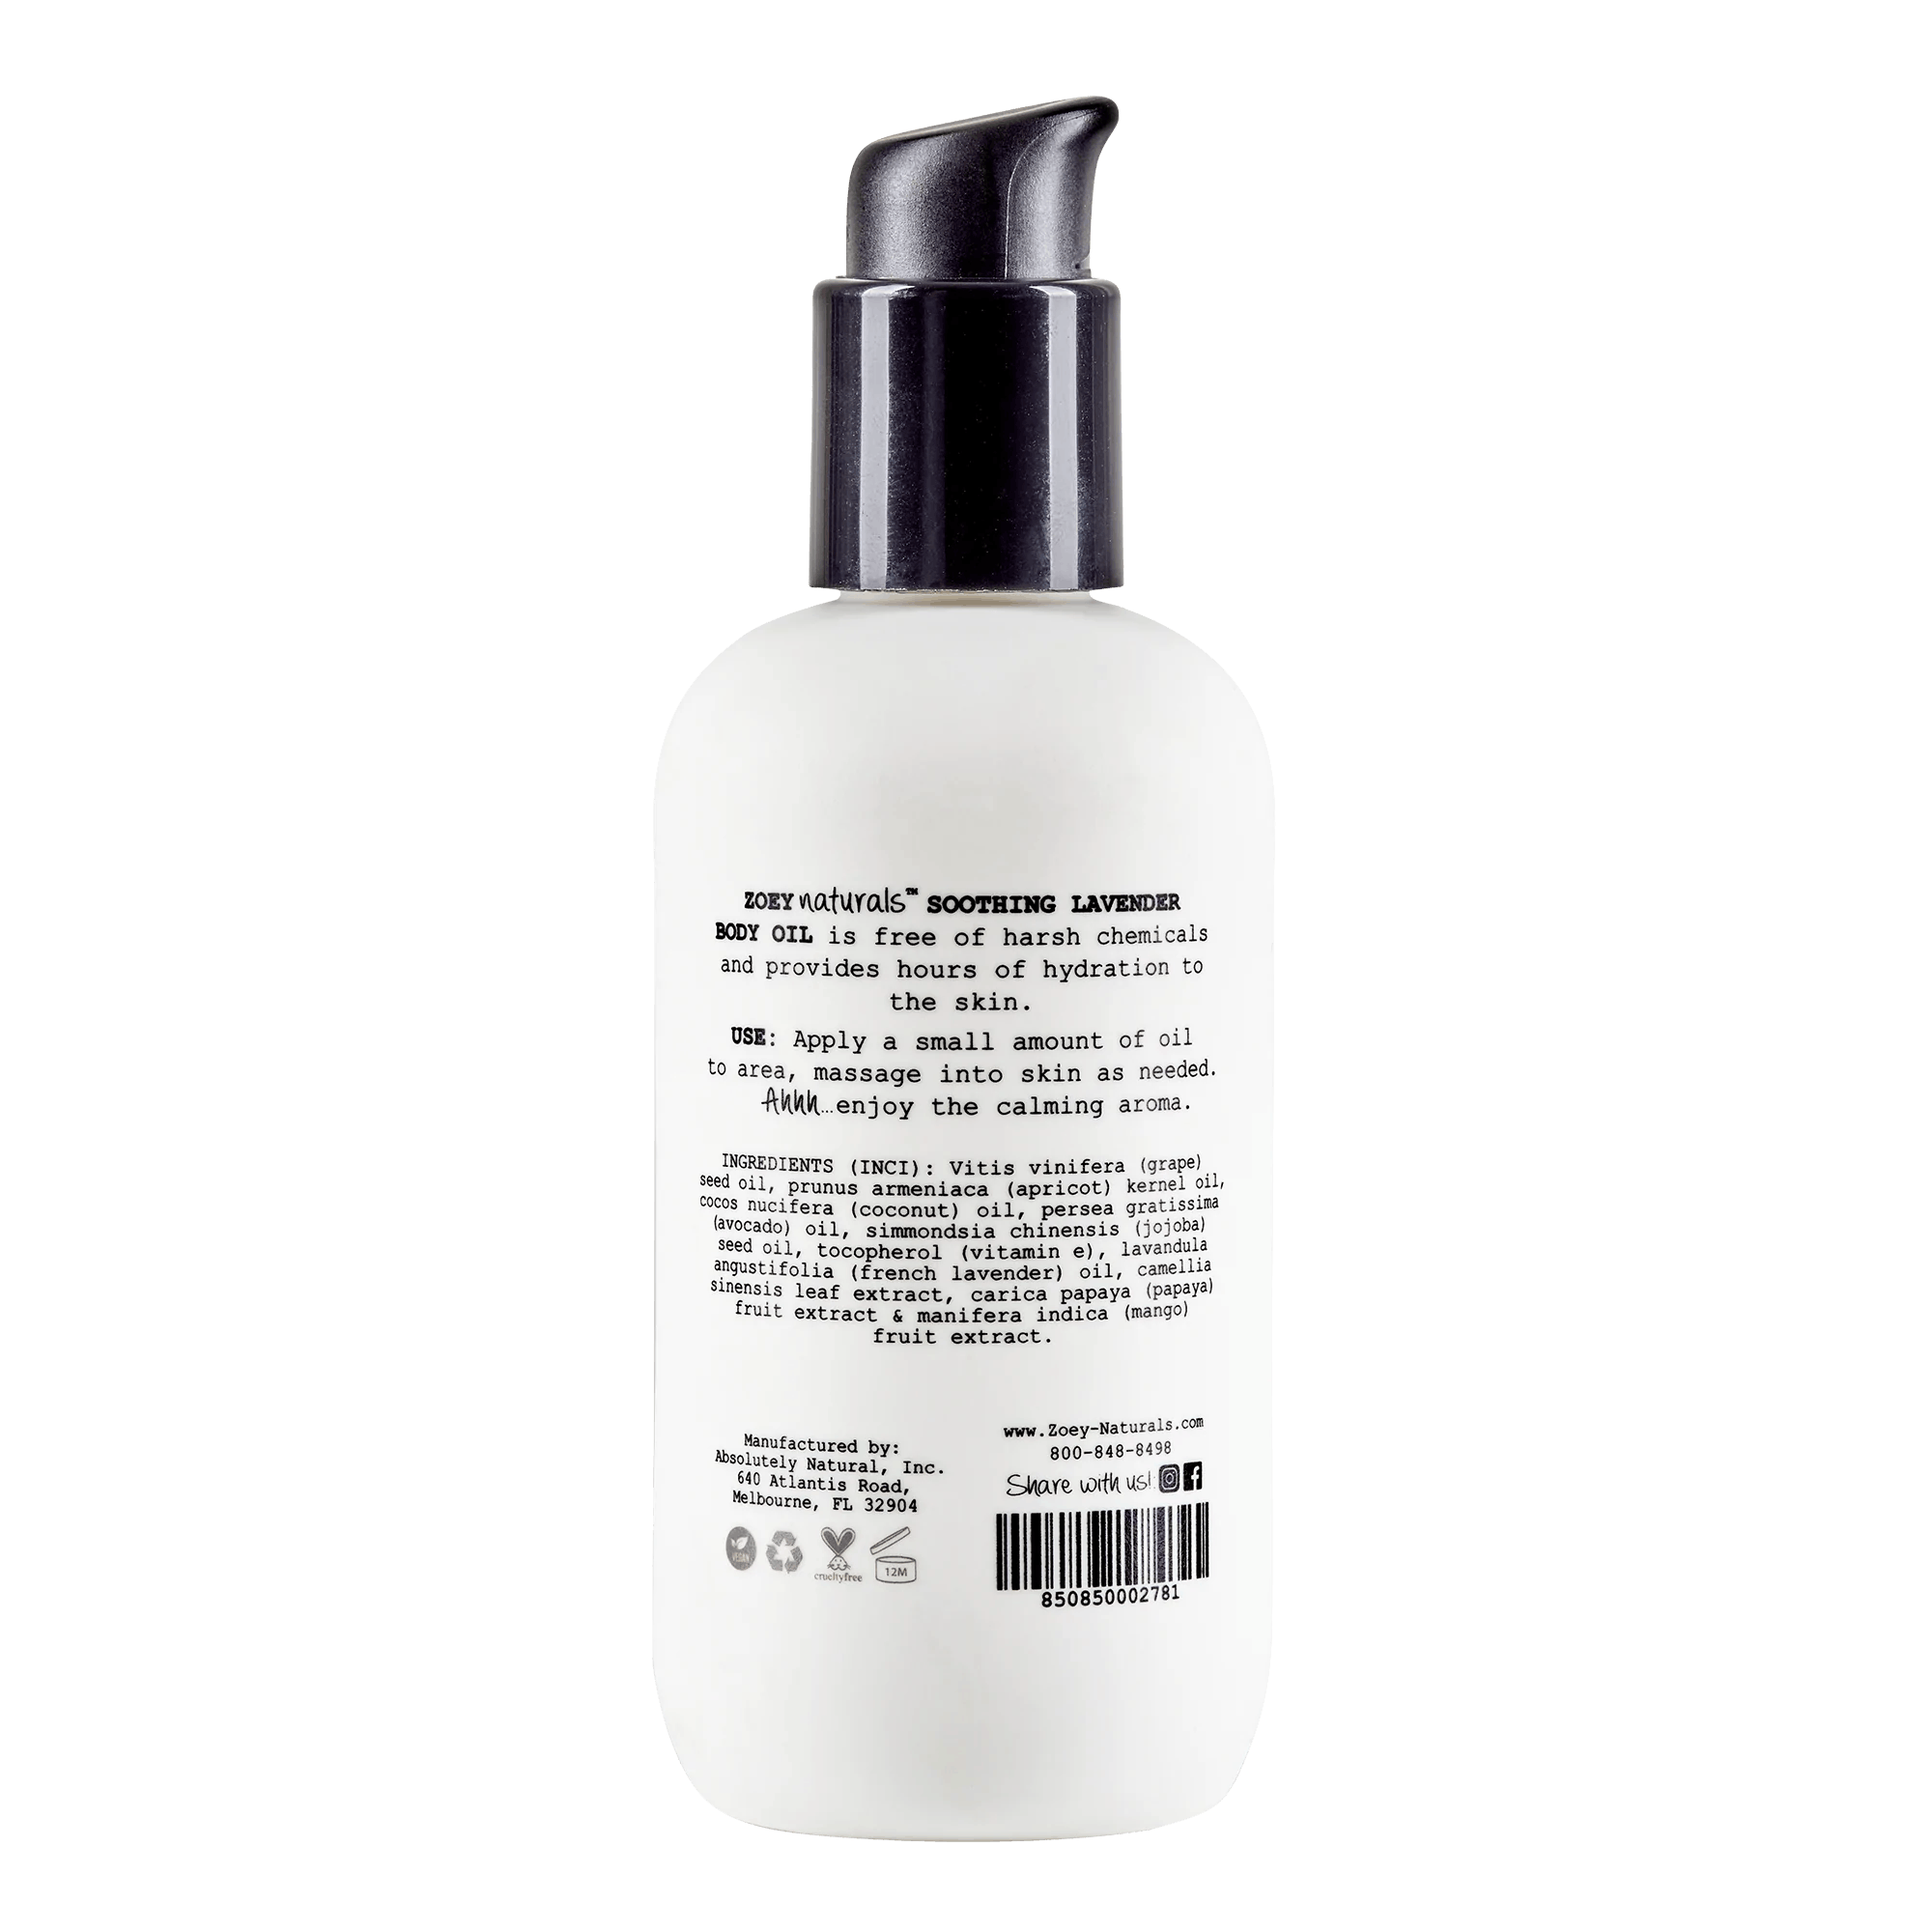 Zoey Naturals Soothing Lavender Body Oil